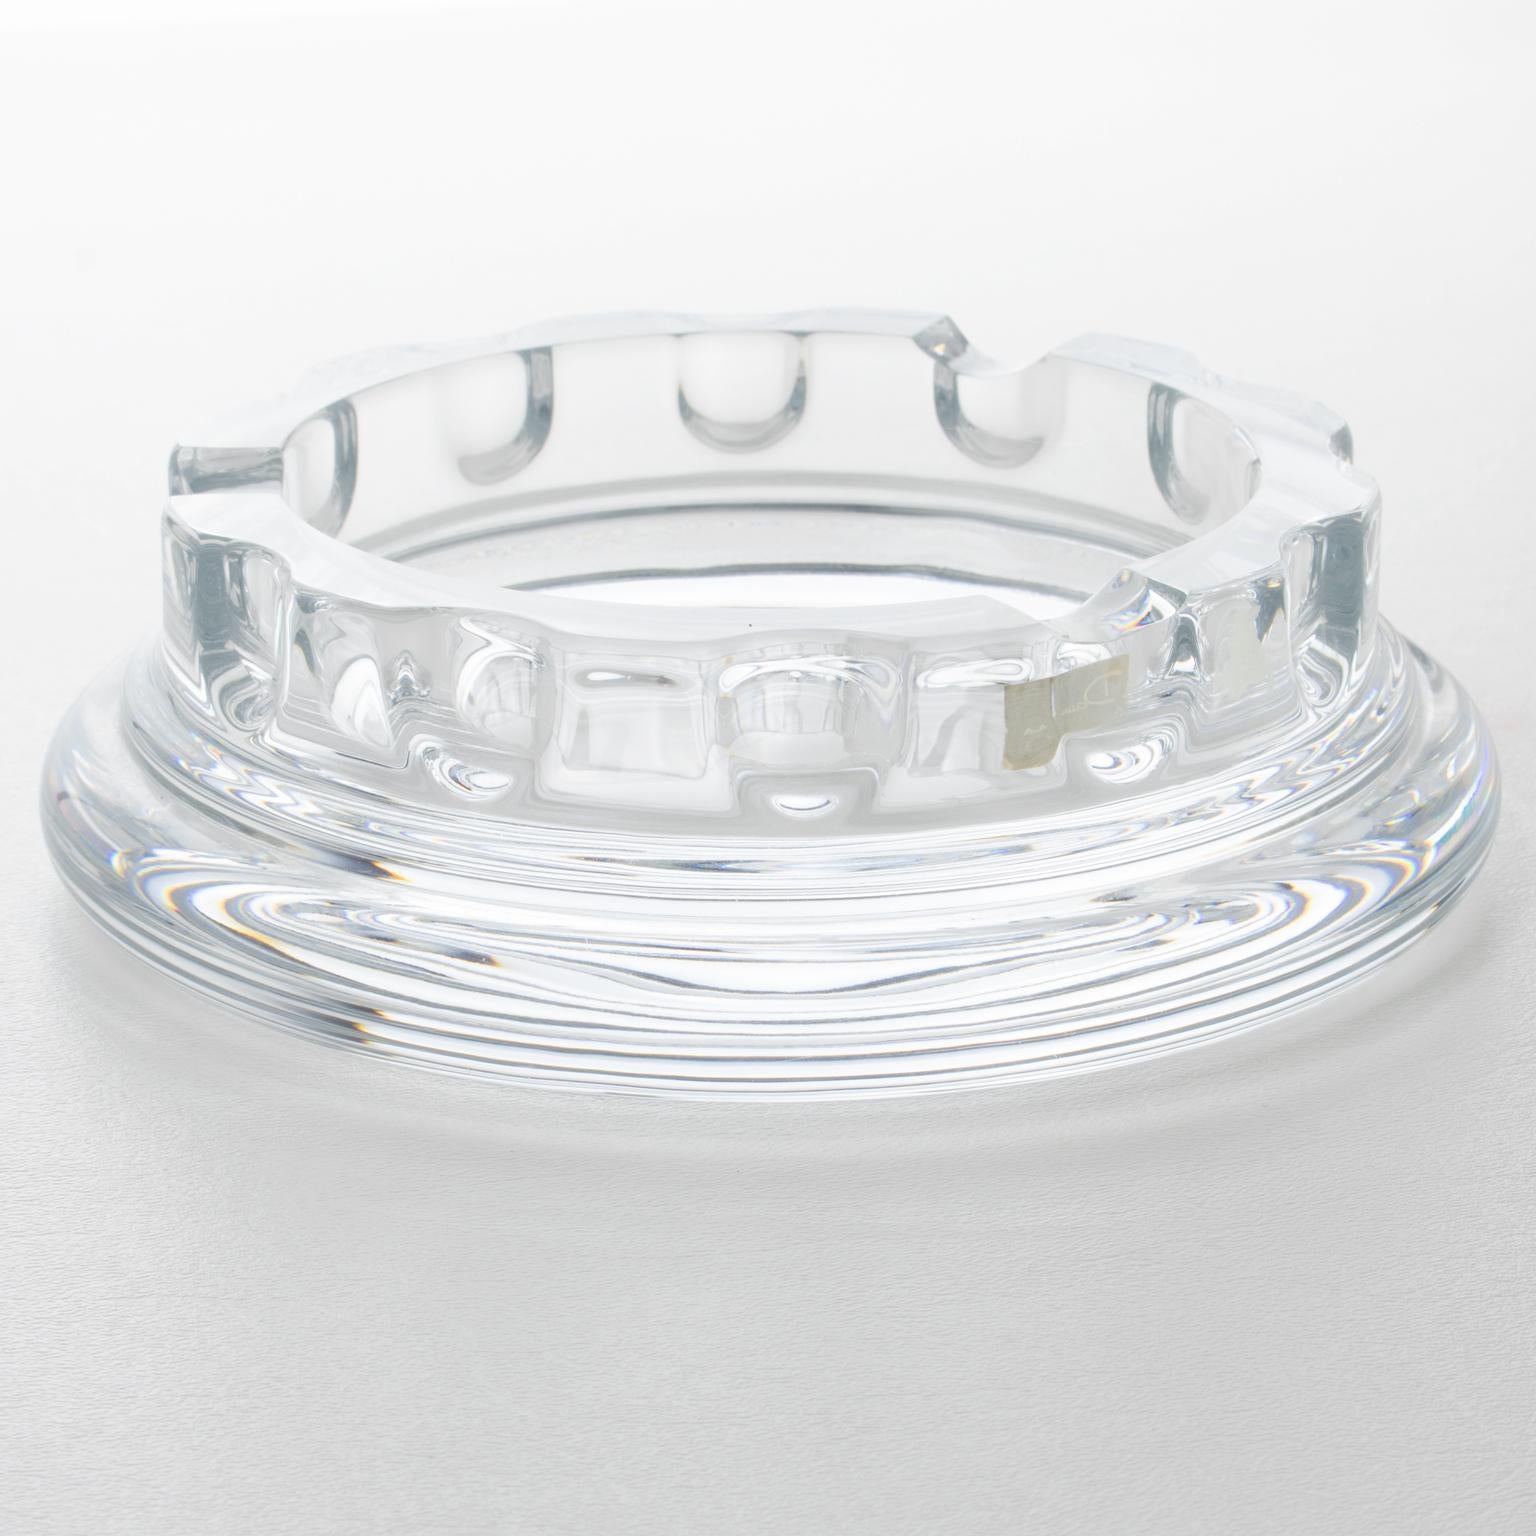 French Daum France Crystal Cigar Ashtray Decorative Bowl Vide Poche Catchall, 1970s For Sale